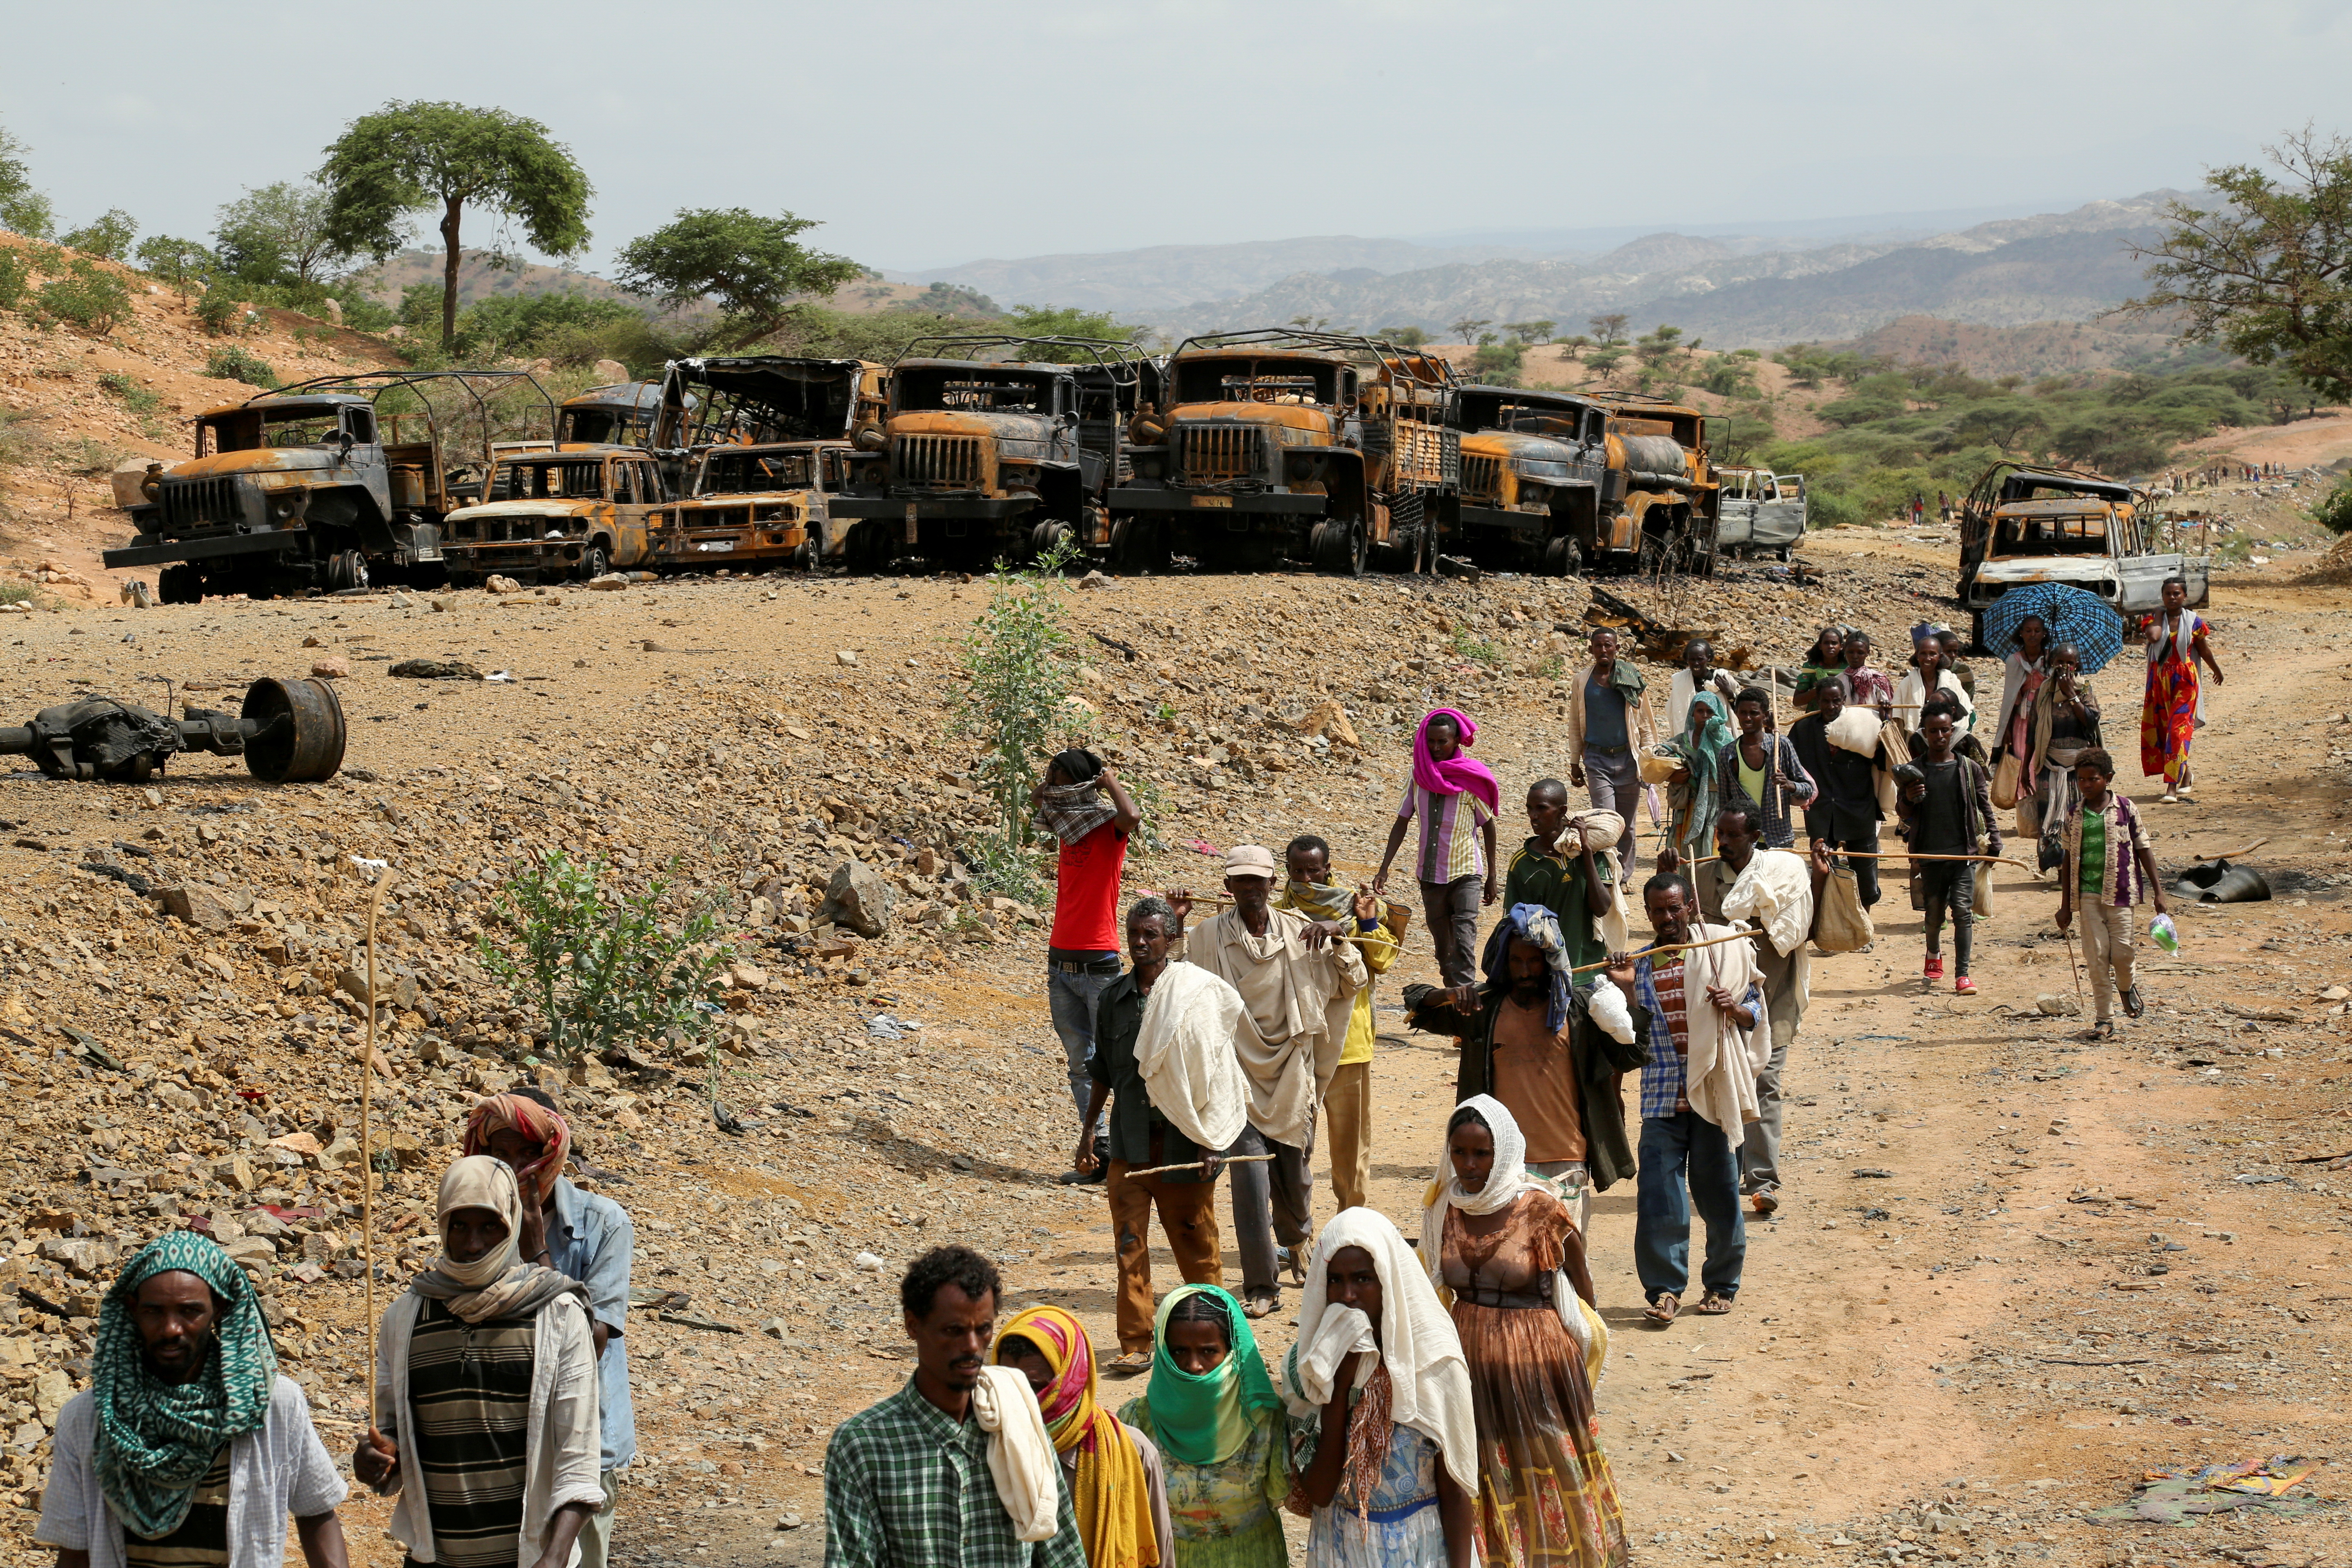 Villagers return from a market to Yechila town in south central Tigray walking past scores of burned vehicles, in Tigray